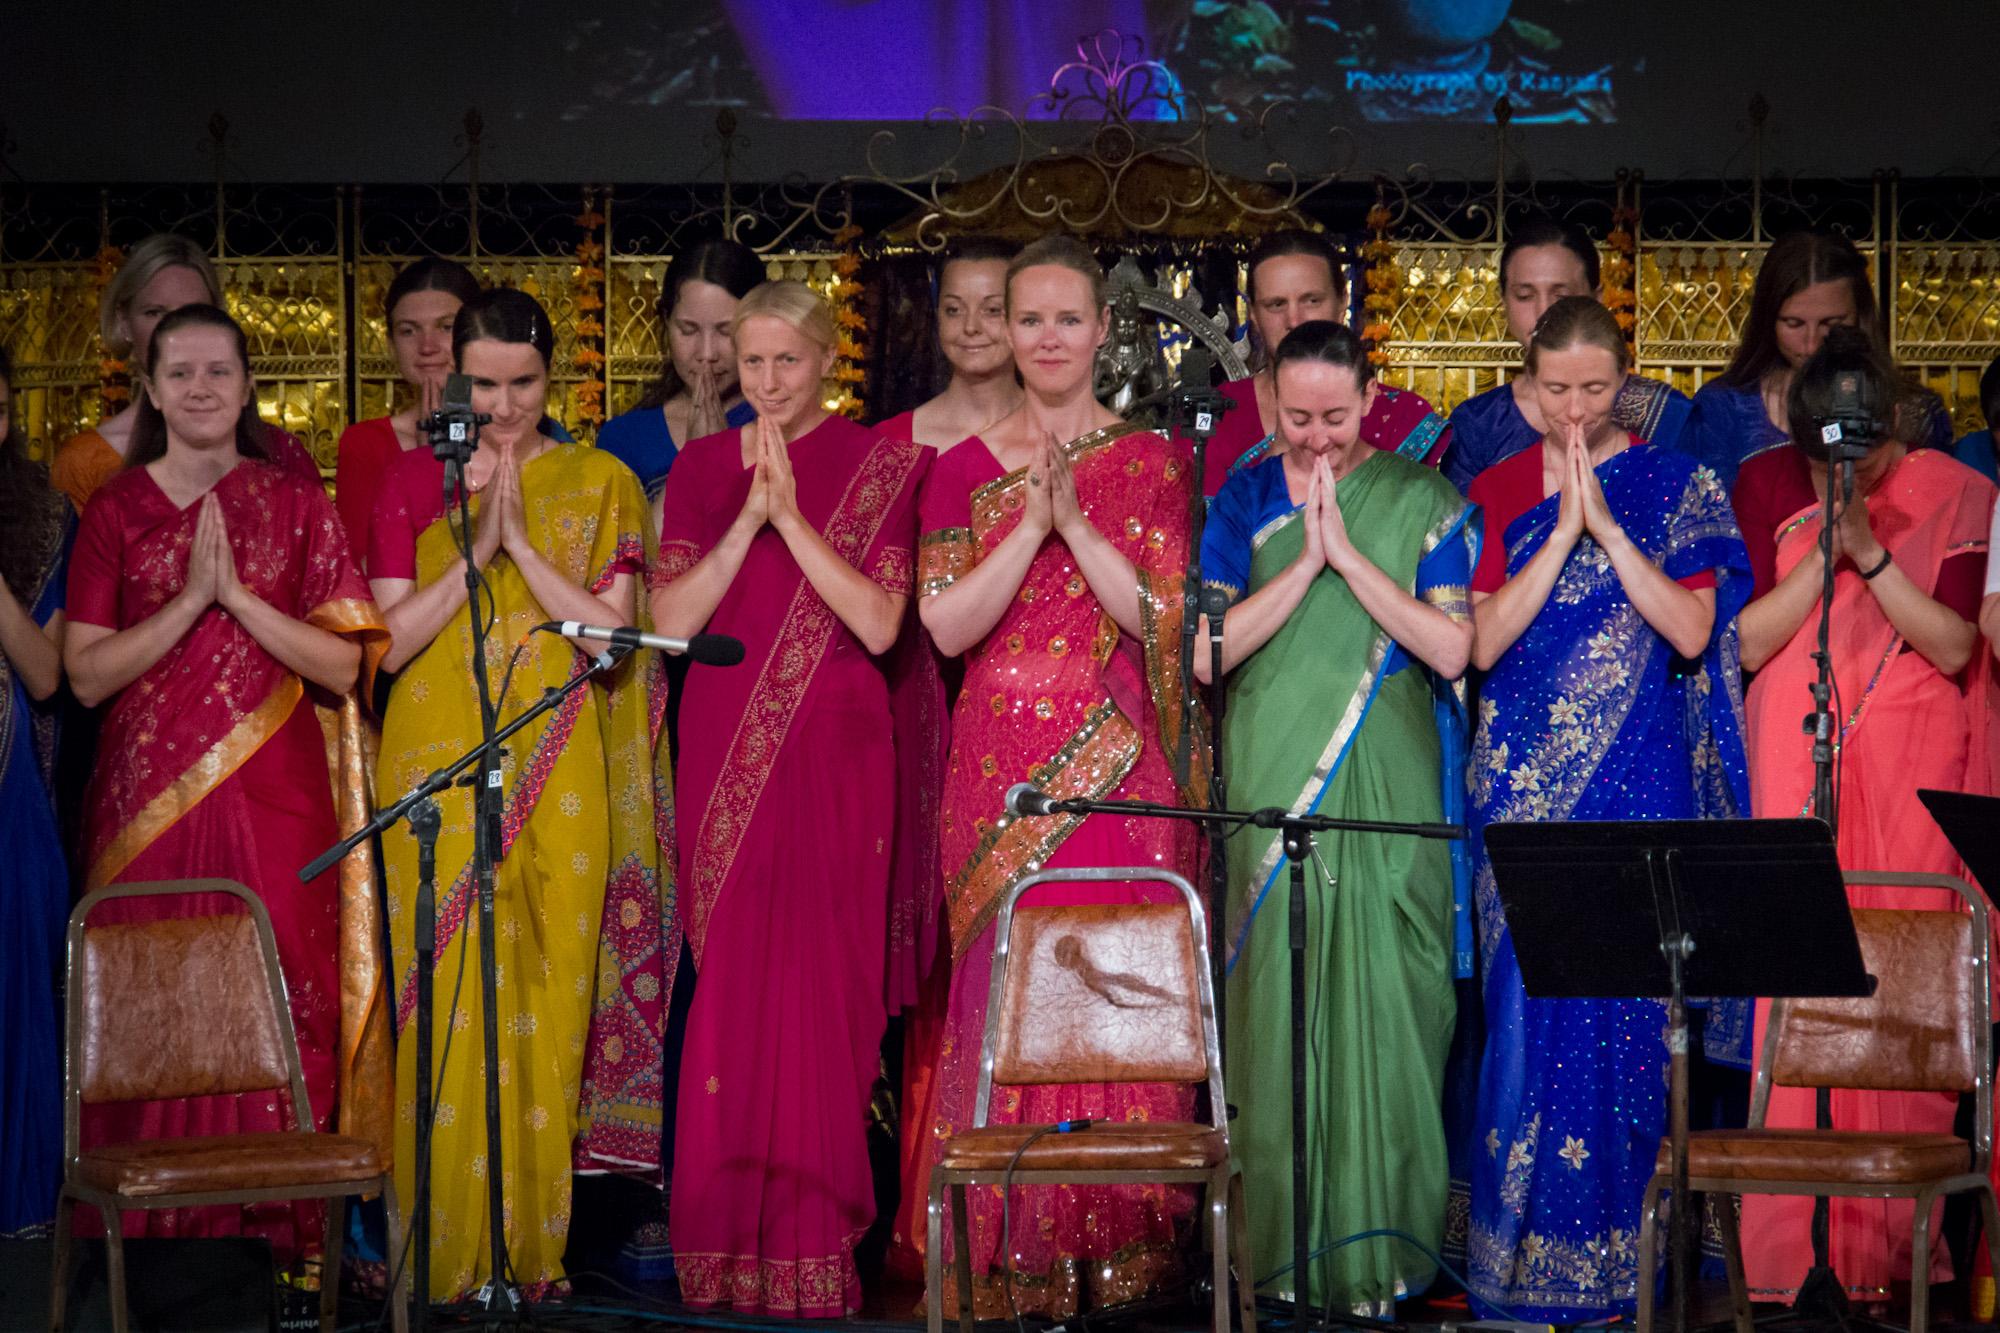 File:A concert performance by women in Saris, New York.jpg - a group of women singing